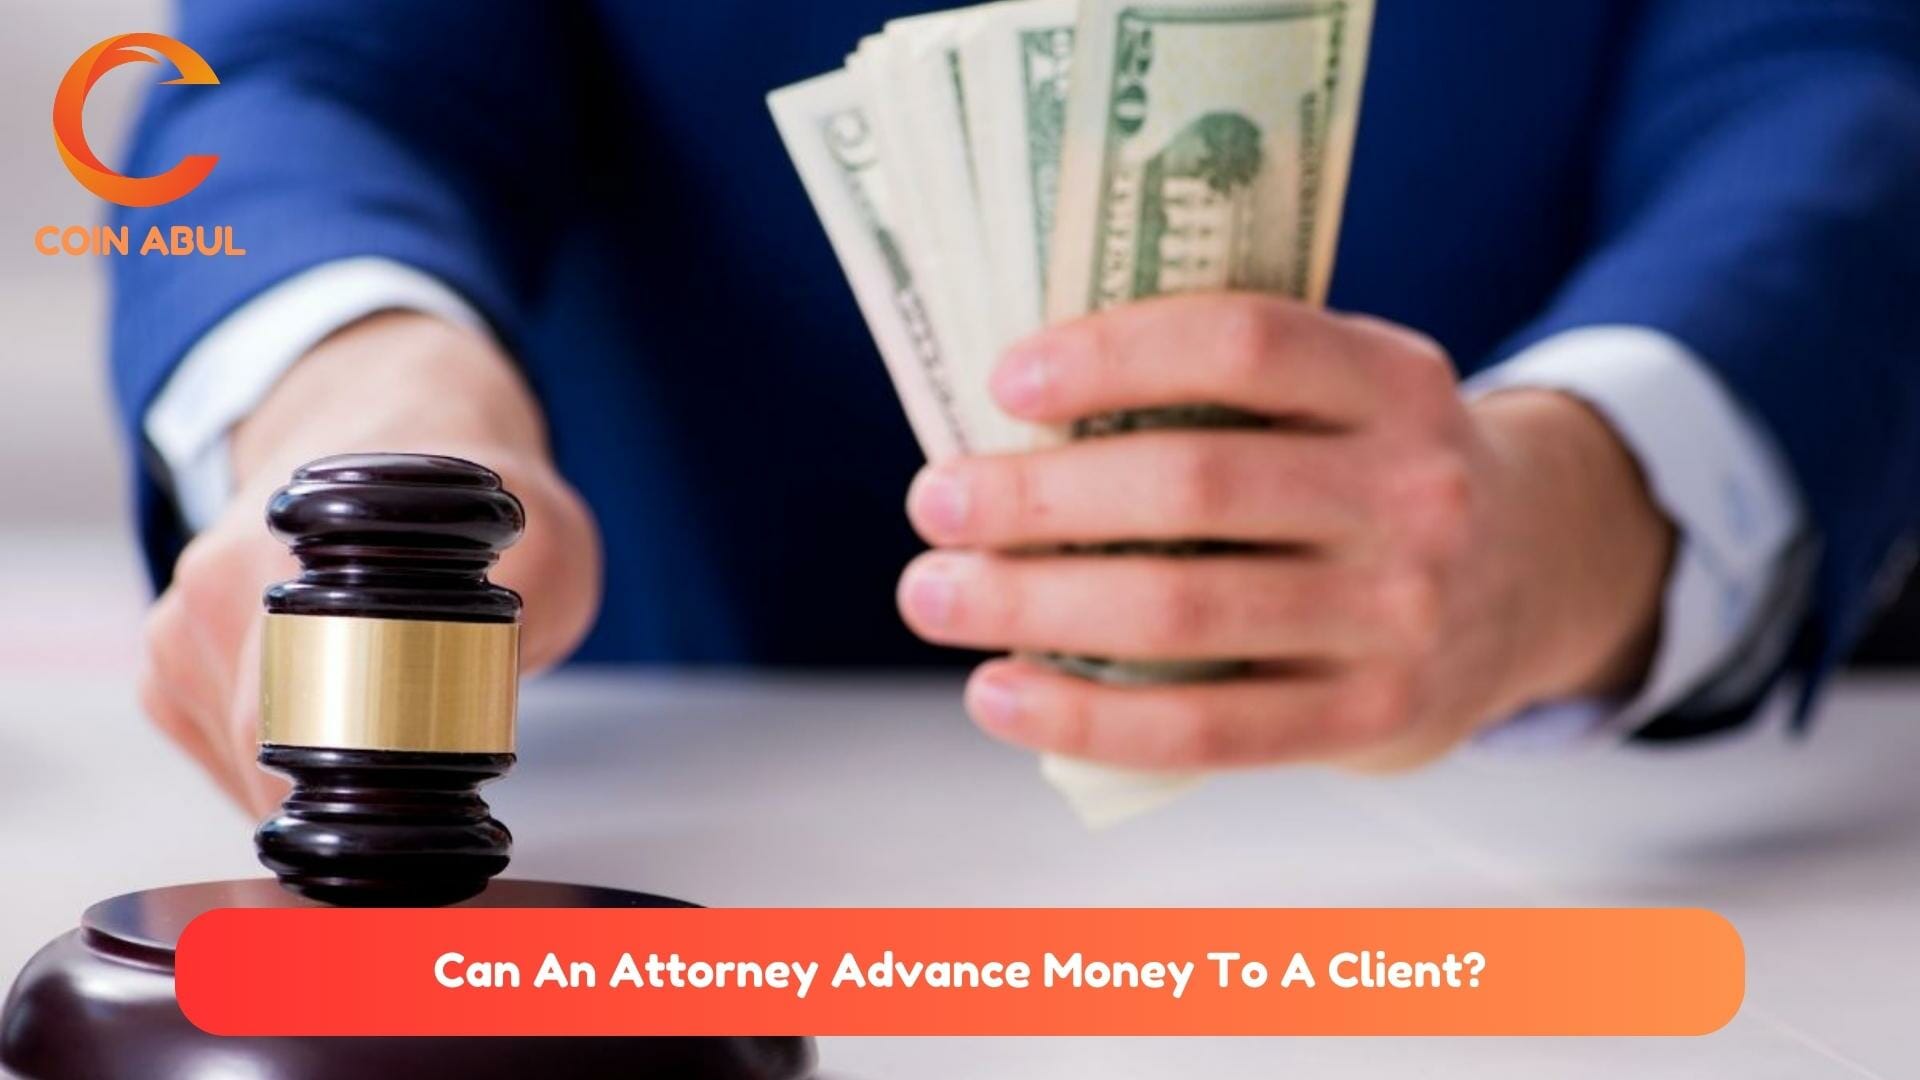 Can An Attorney Advance Money To A Client